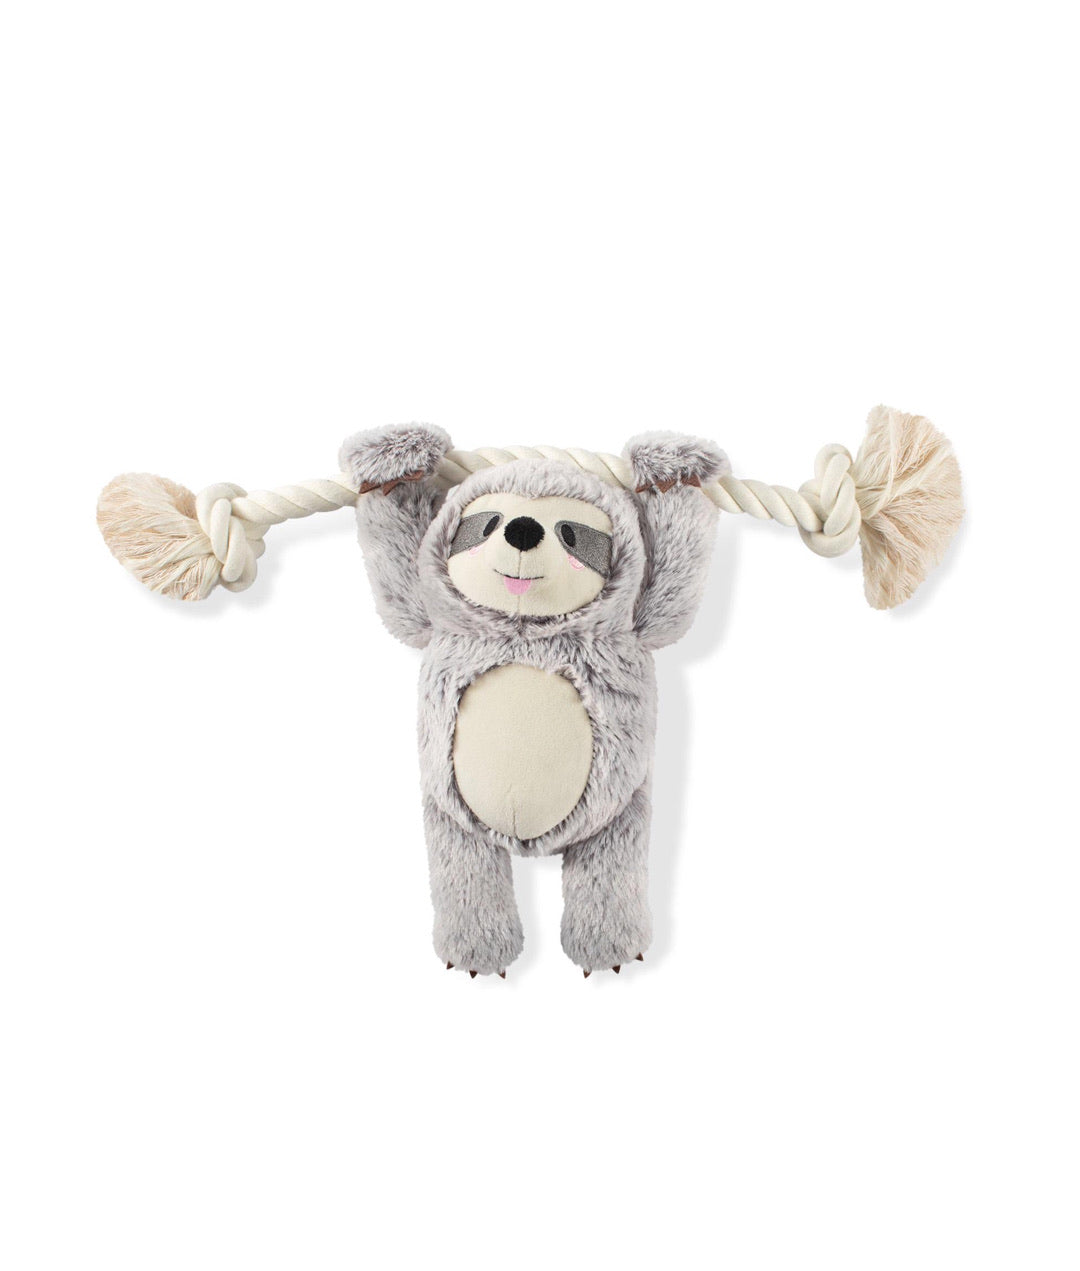 Fringe Studio Toy Box Girlie Sloth On A Rope Squeaky Plush Toy